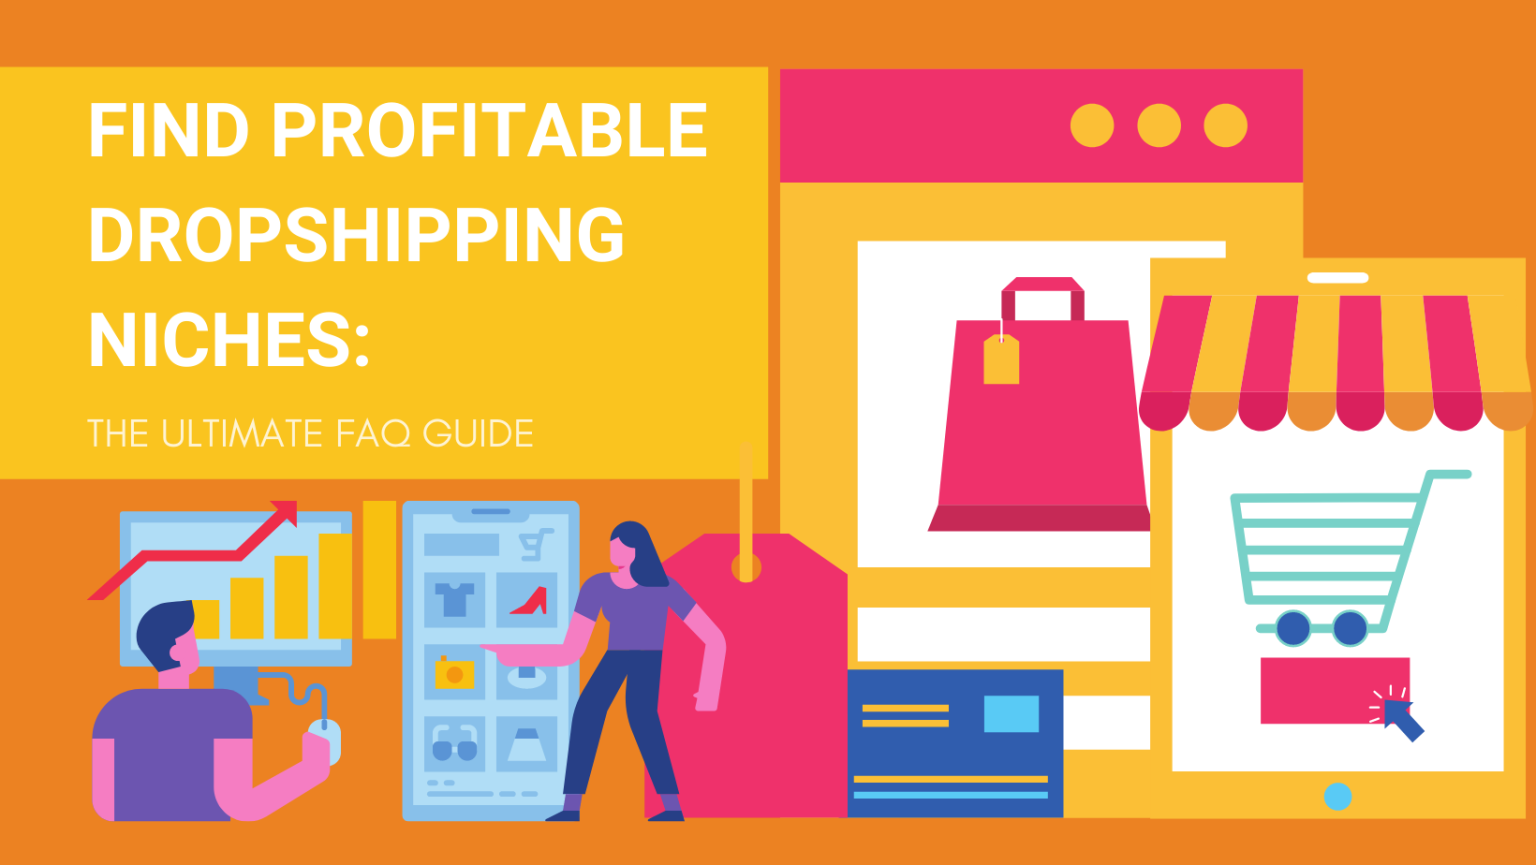 Find Profitable Dropshipping Niches The Ultimate FAQ Guide